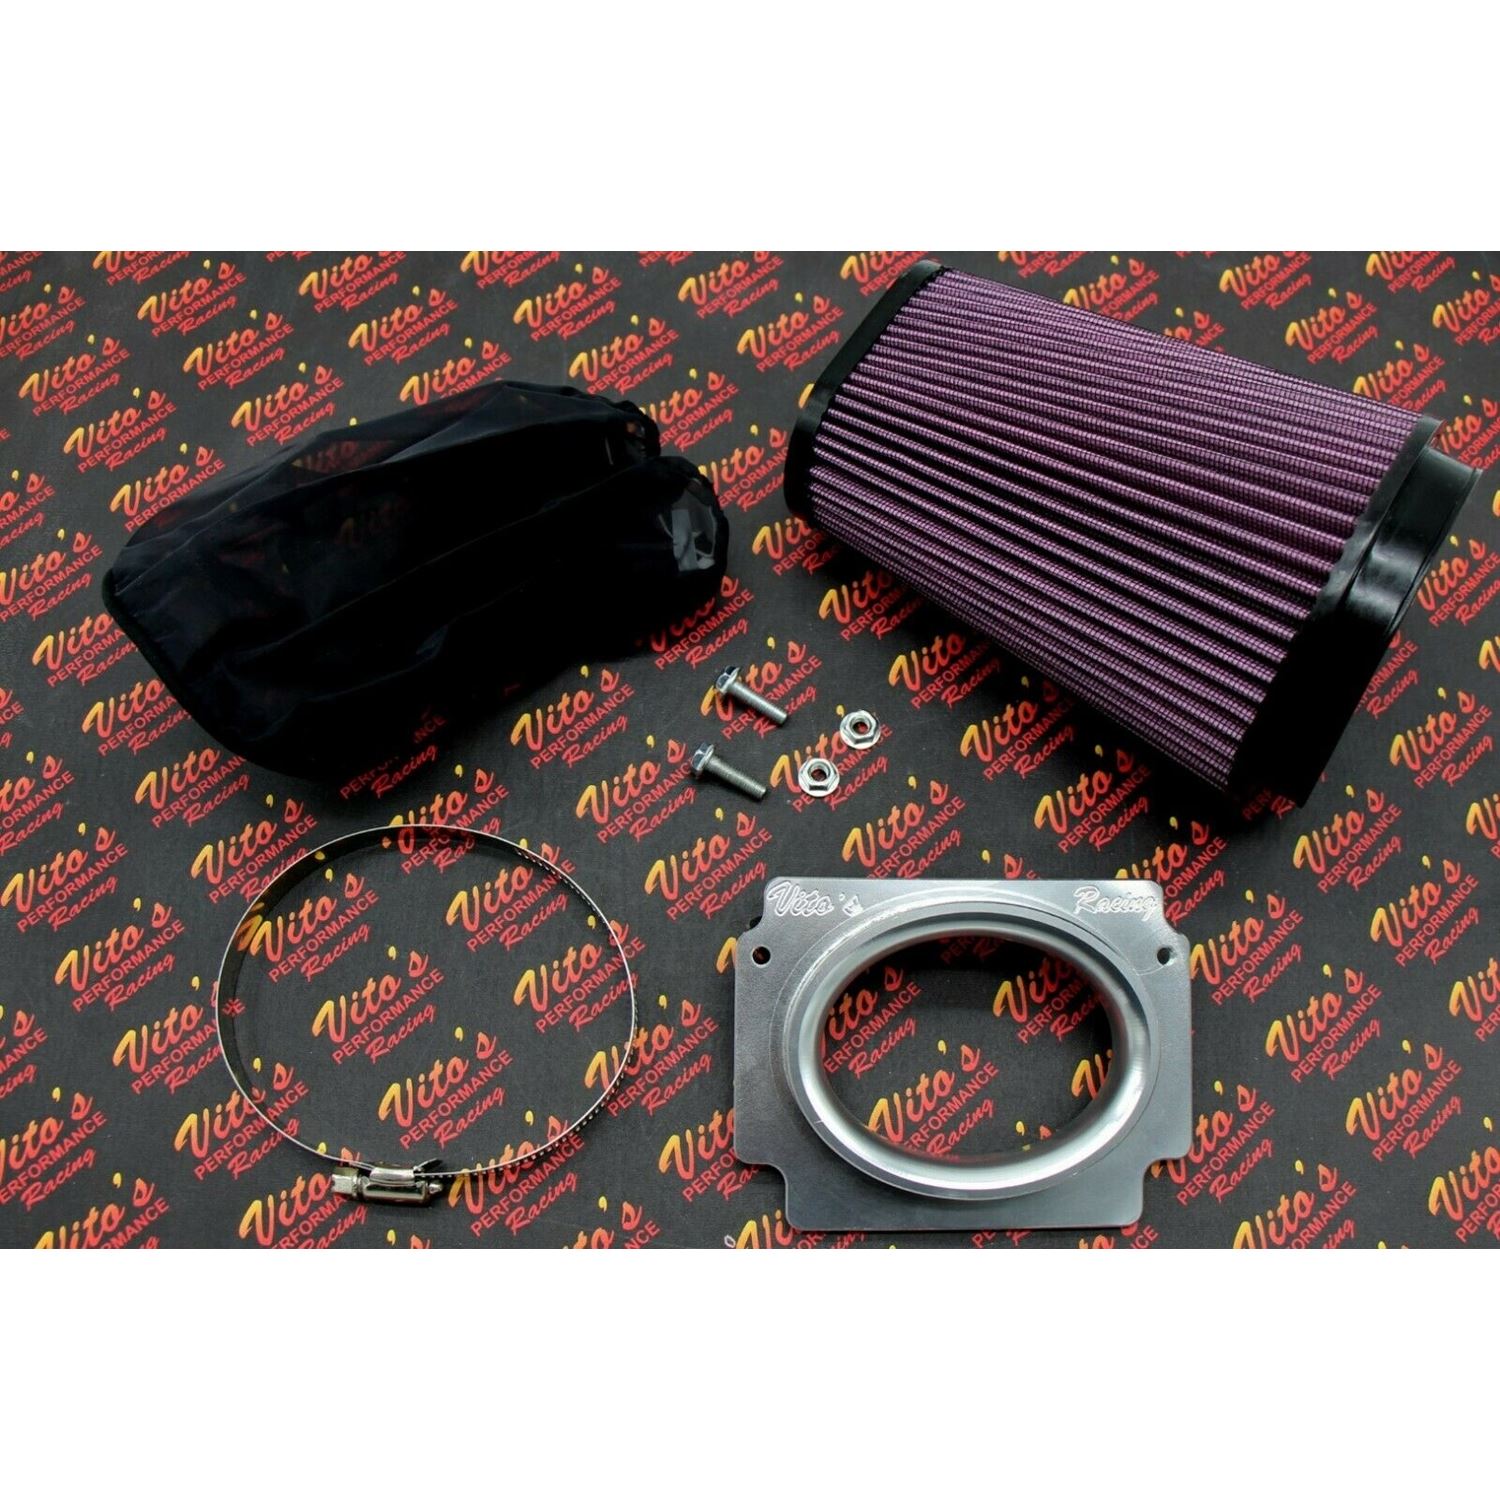 Vito's PRO FLOW airbox adapter K+N style air f